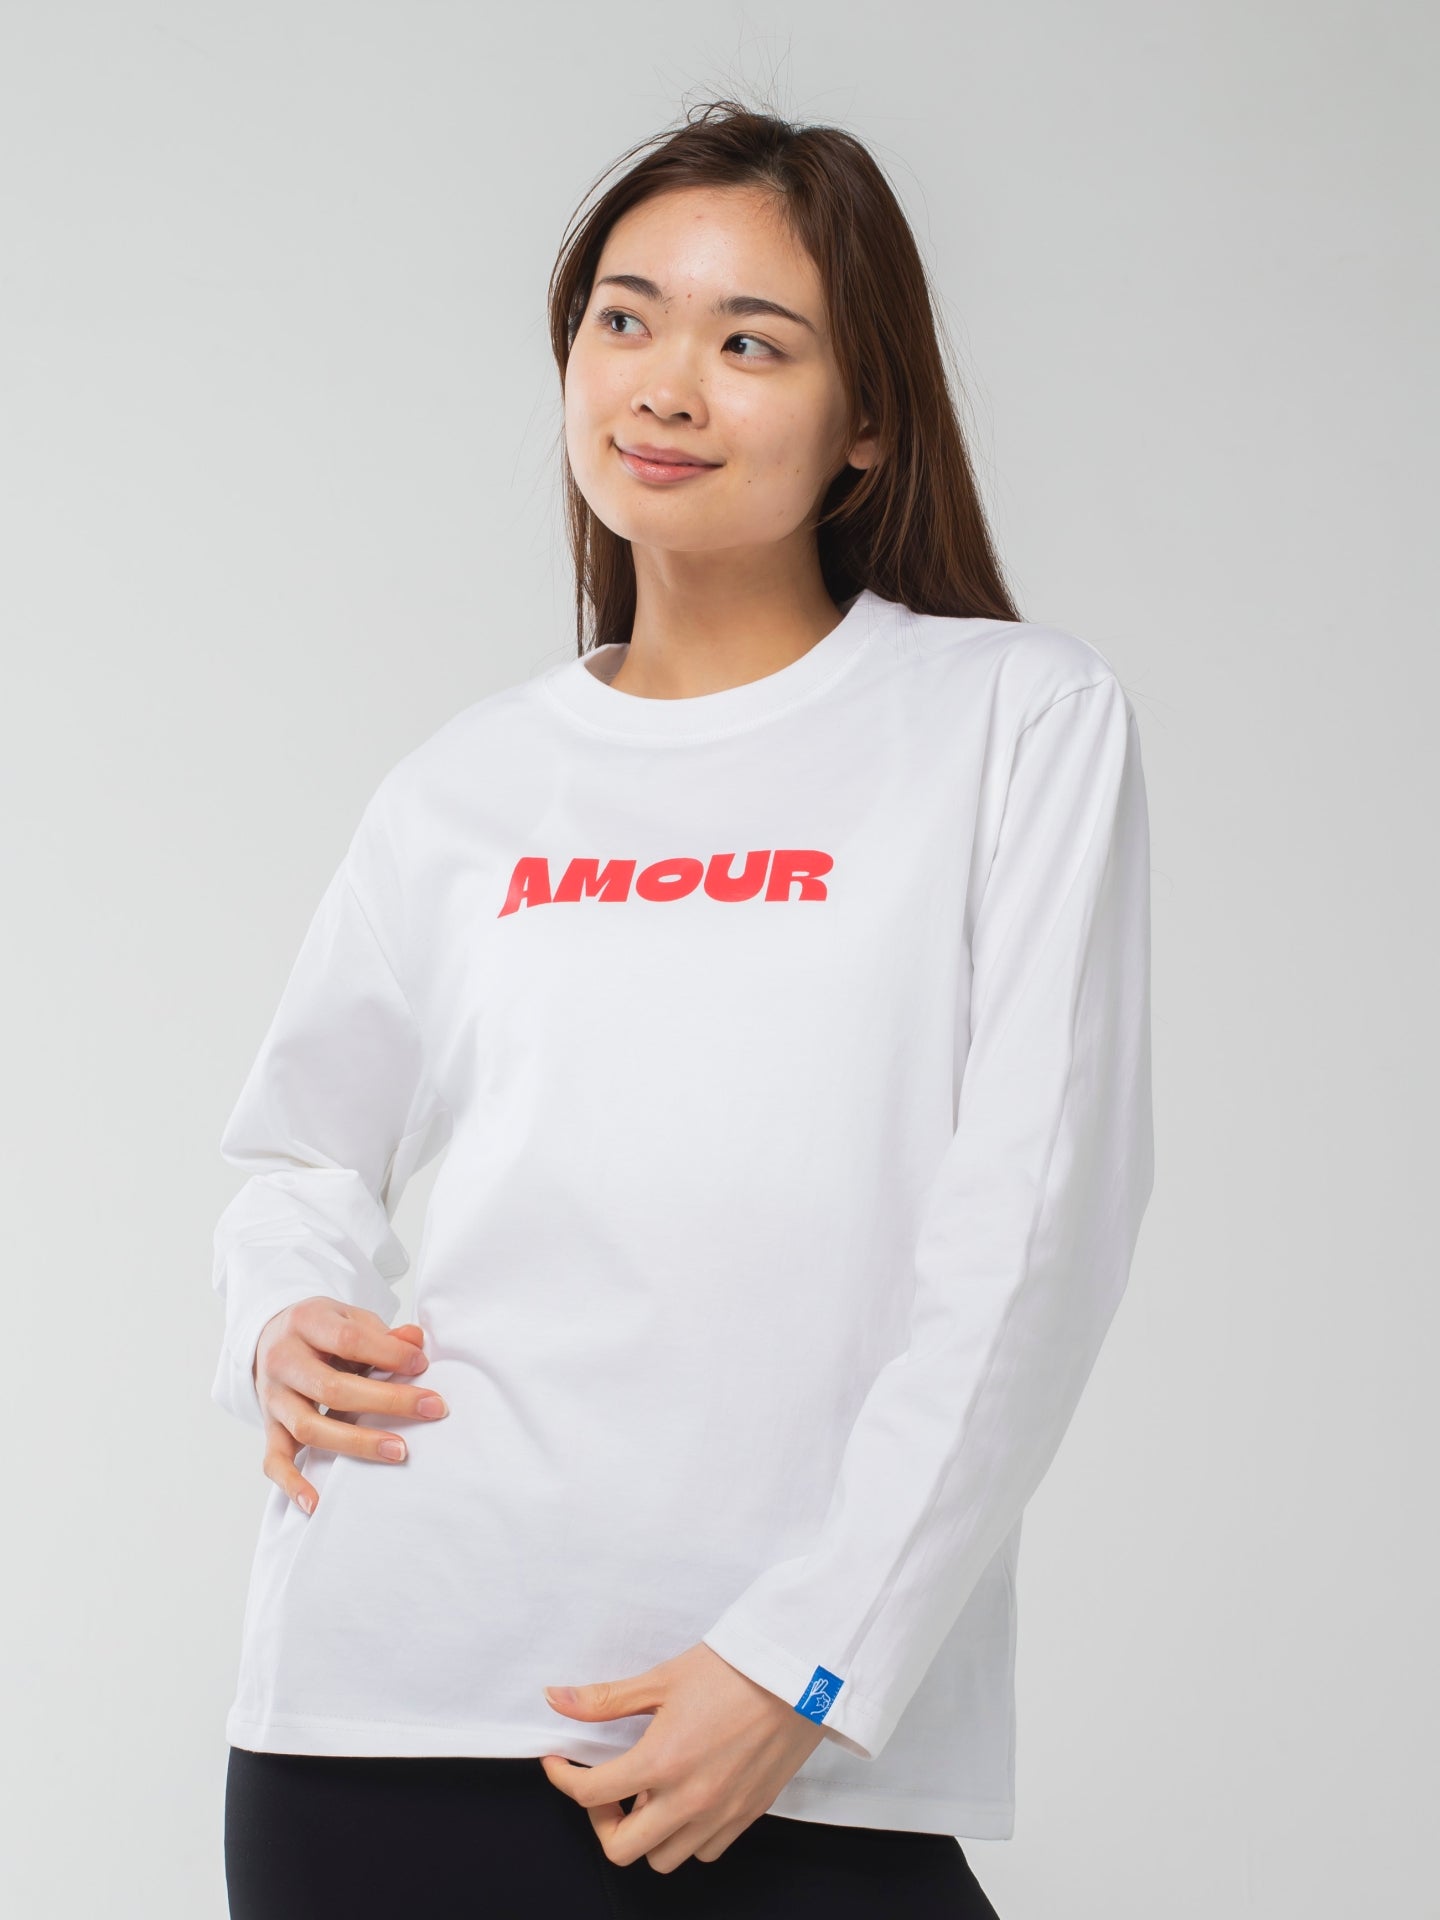 Amour Long-Sleeve Tee White